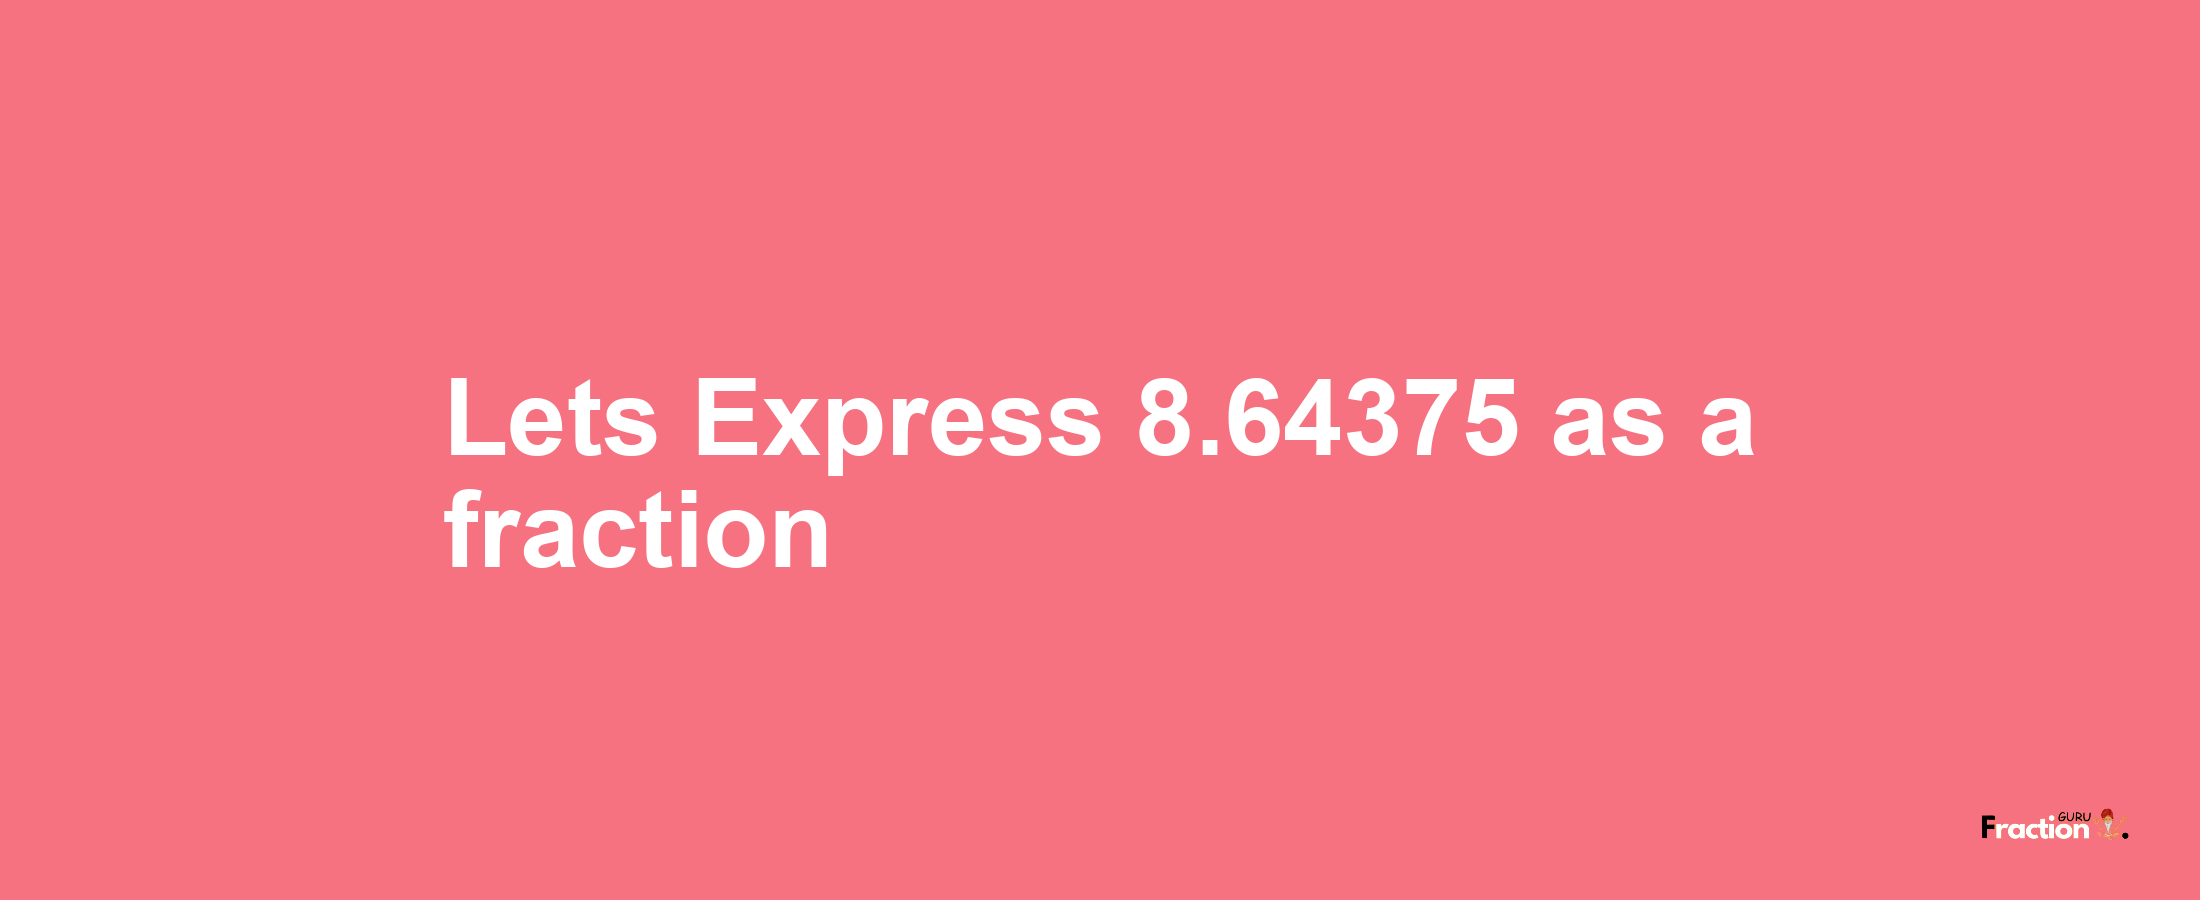 Lets Express 8.64375 as afraction